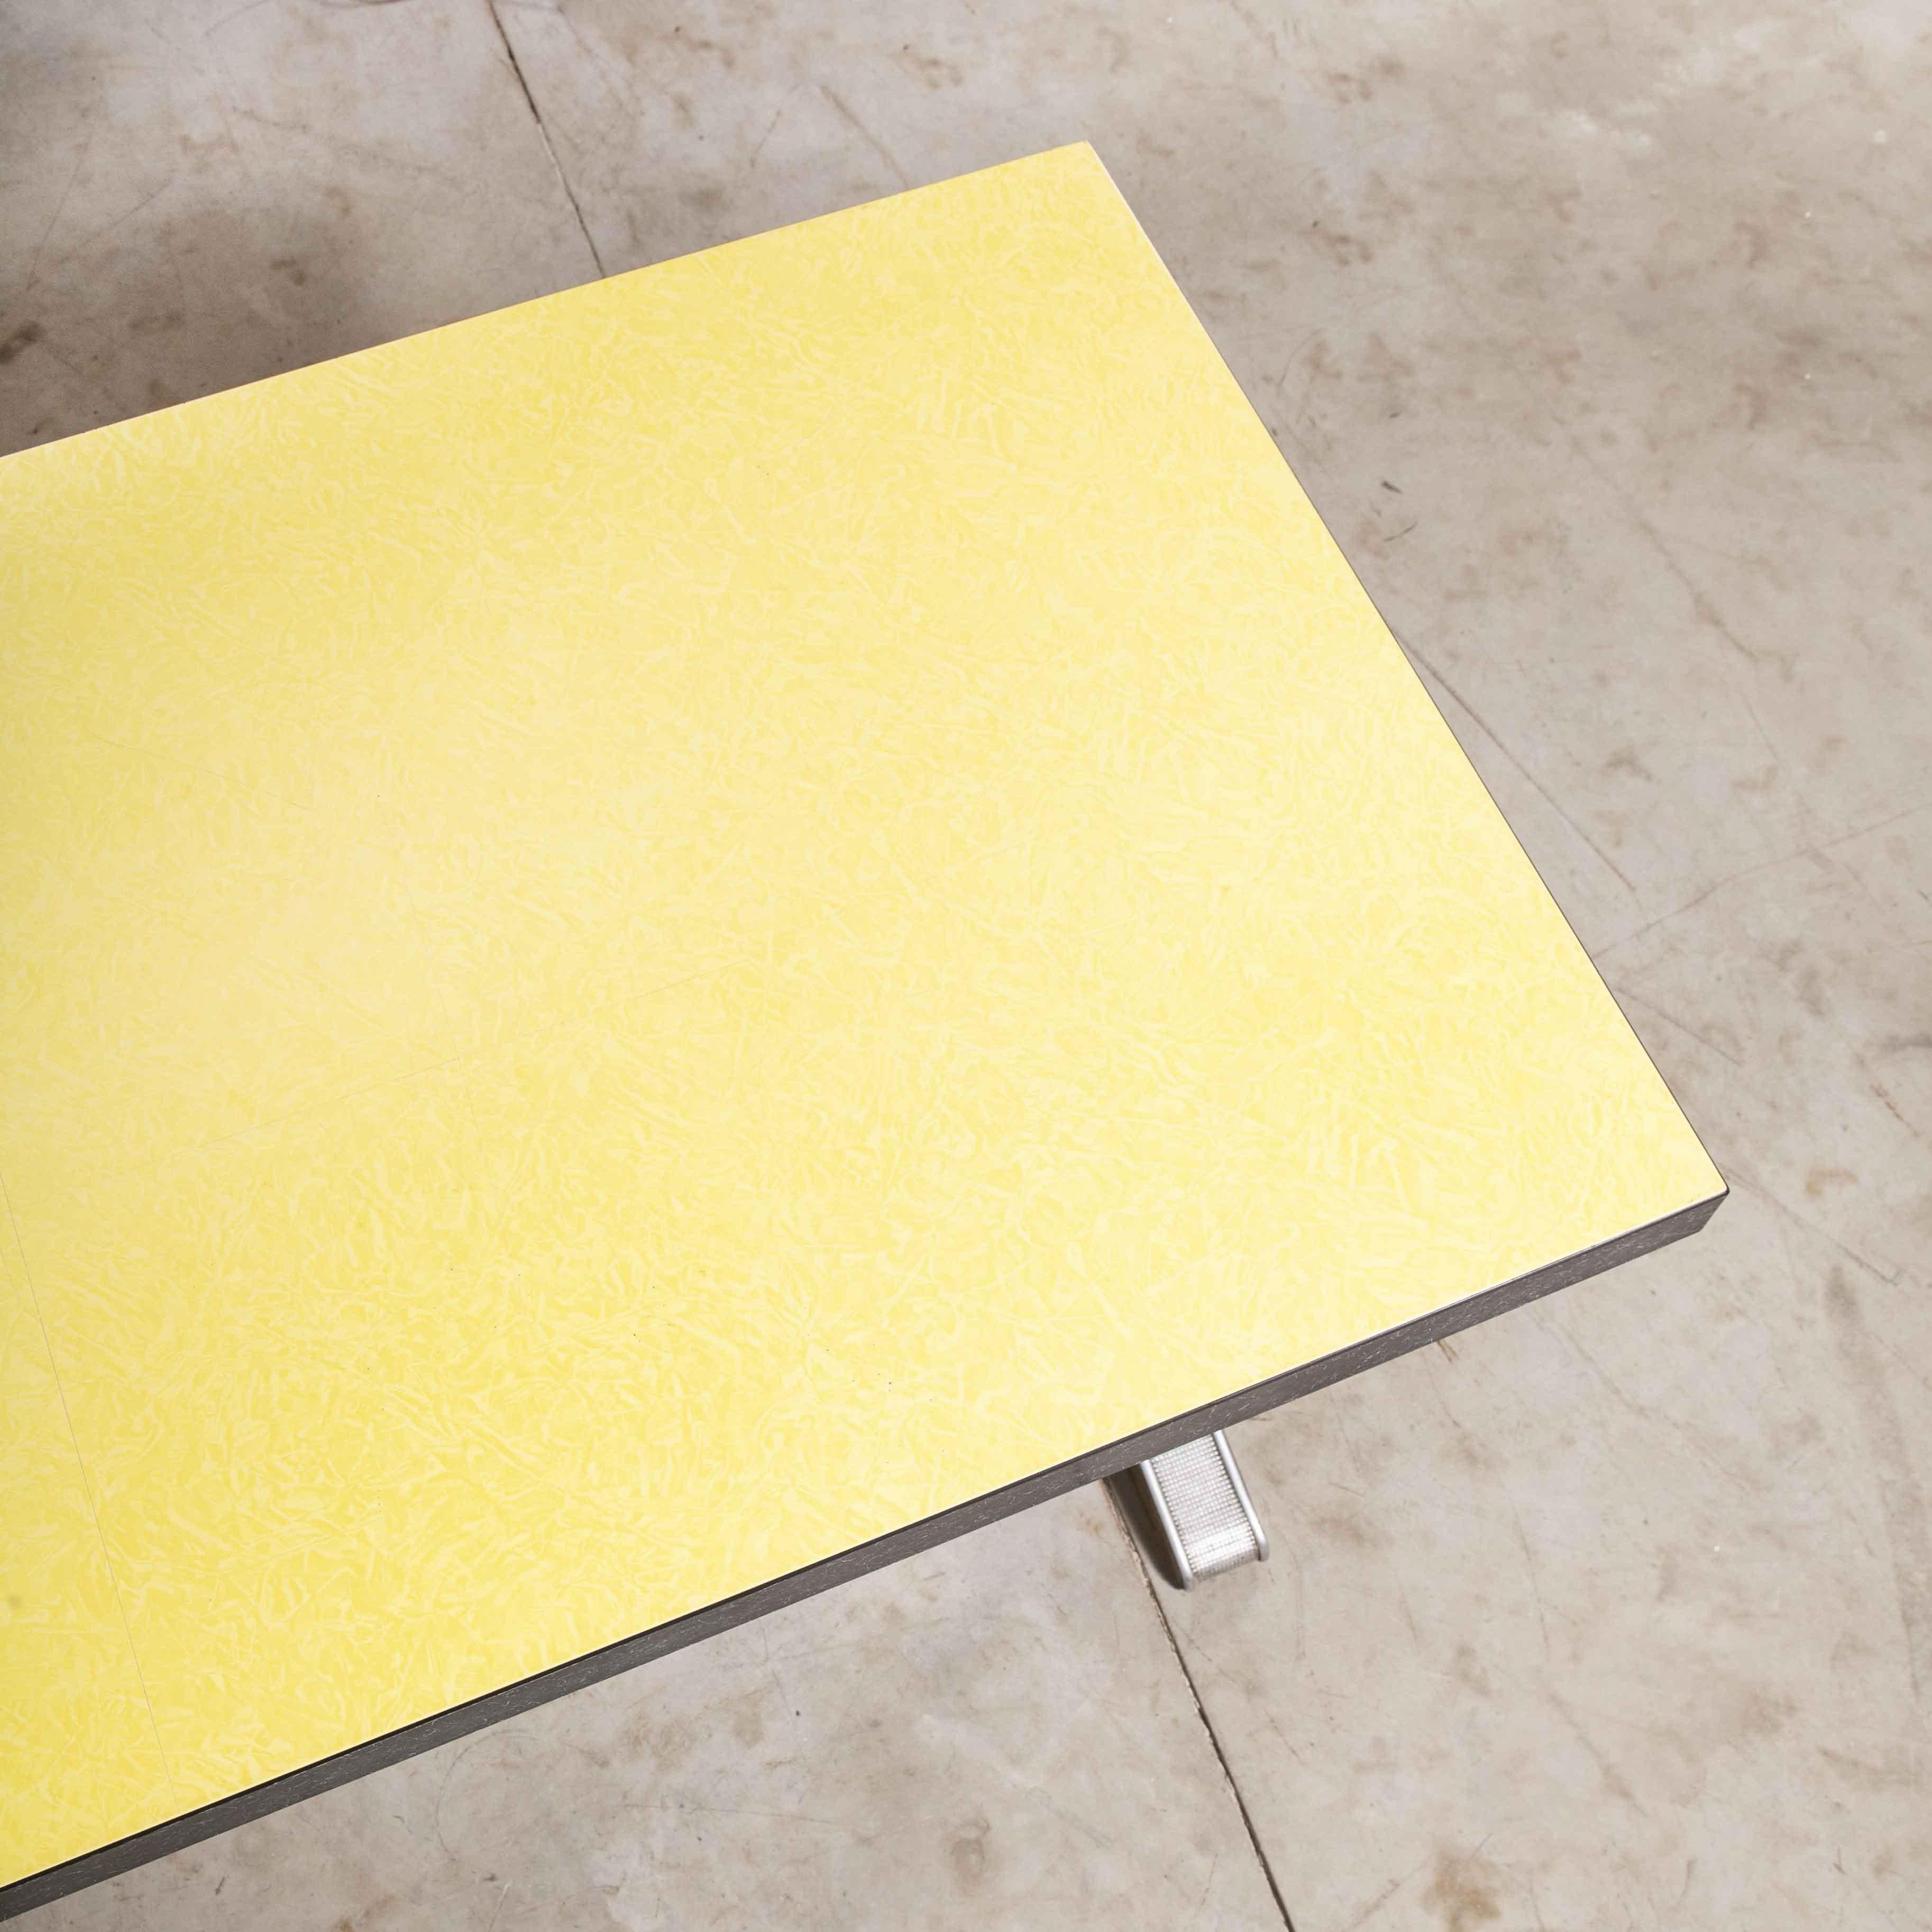 1960’s French Yellow Laminate Dining Table with Aluminium Base, 'Model 779.1' For Sale 3